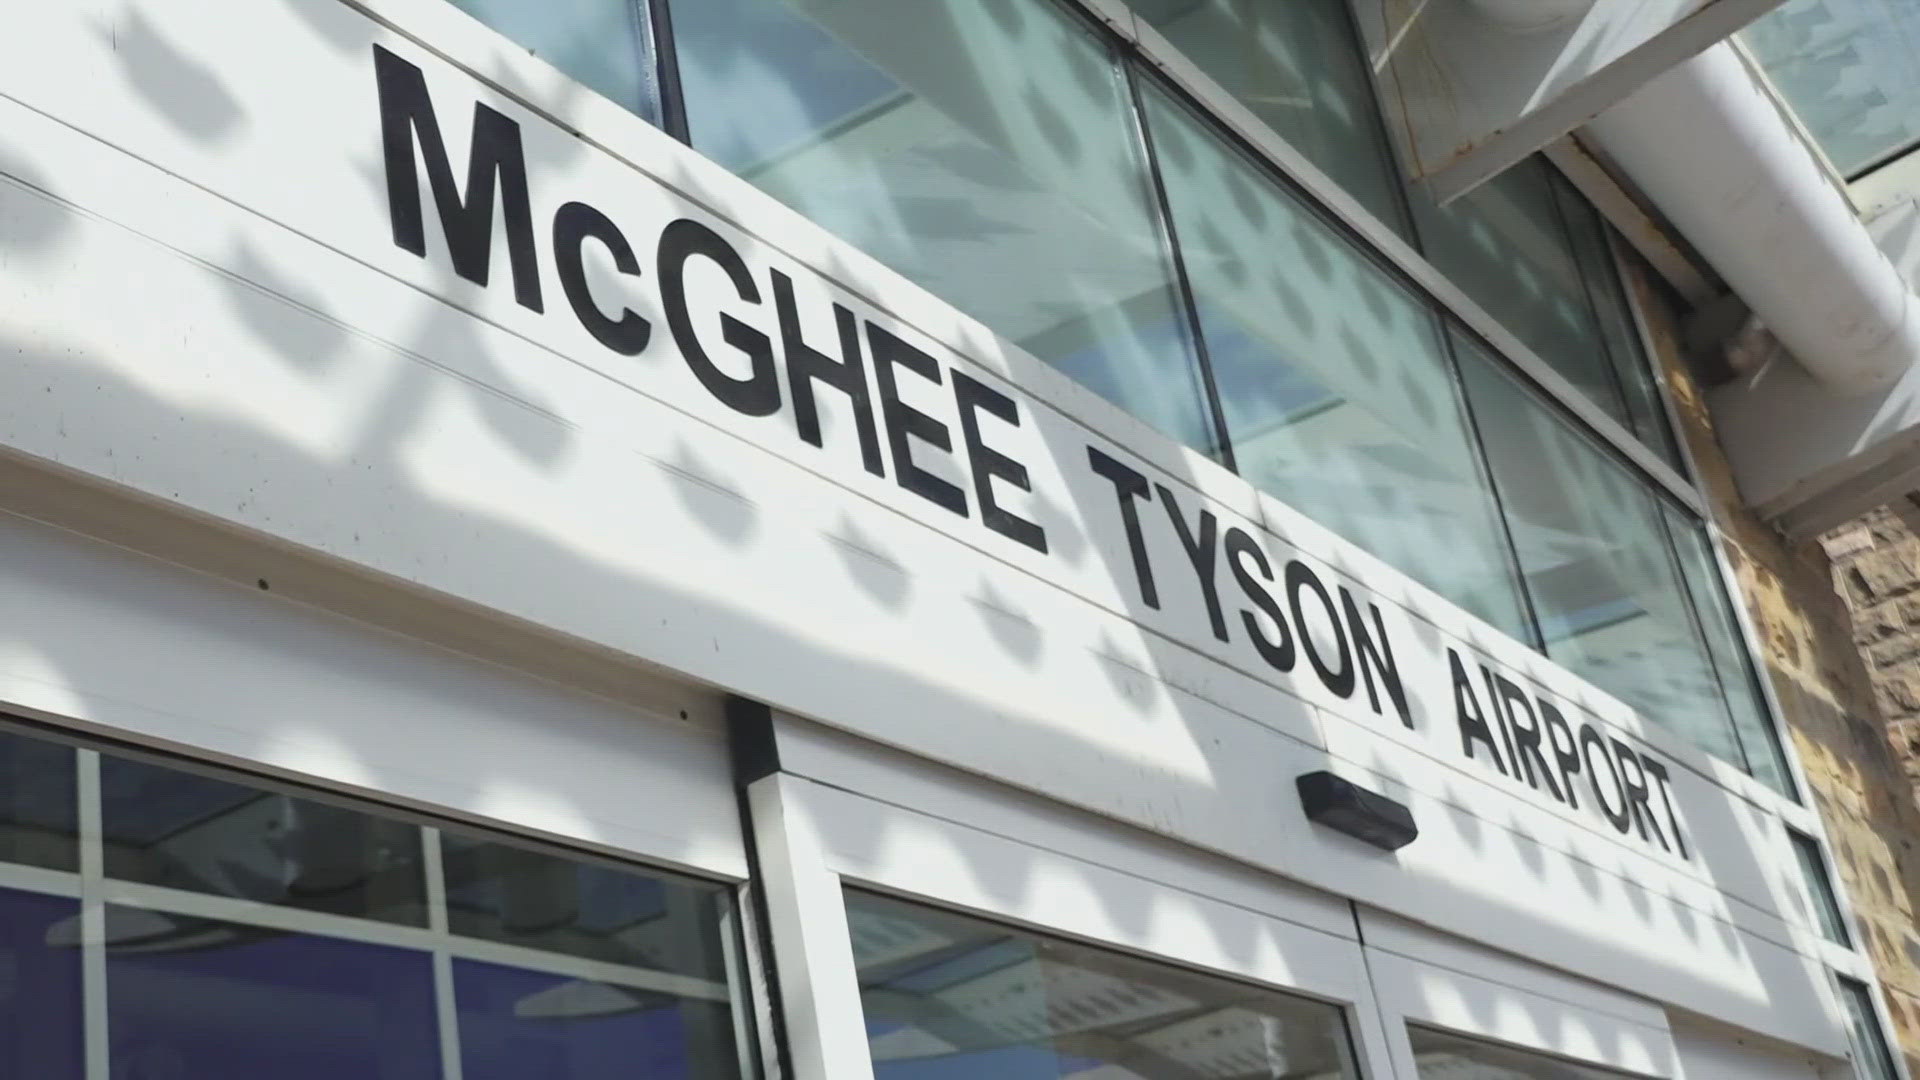 In 2023, there were 2,835,773 people who traveled through McGhee Tyson Airport. The airport says this was a record number of travelers, up from 2,495,737 in 2022.